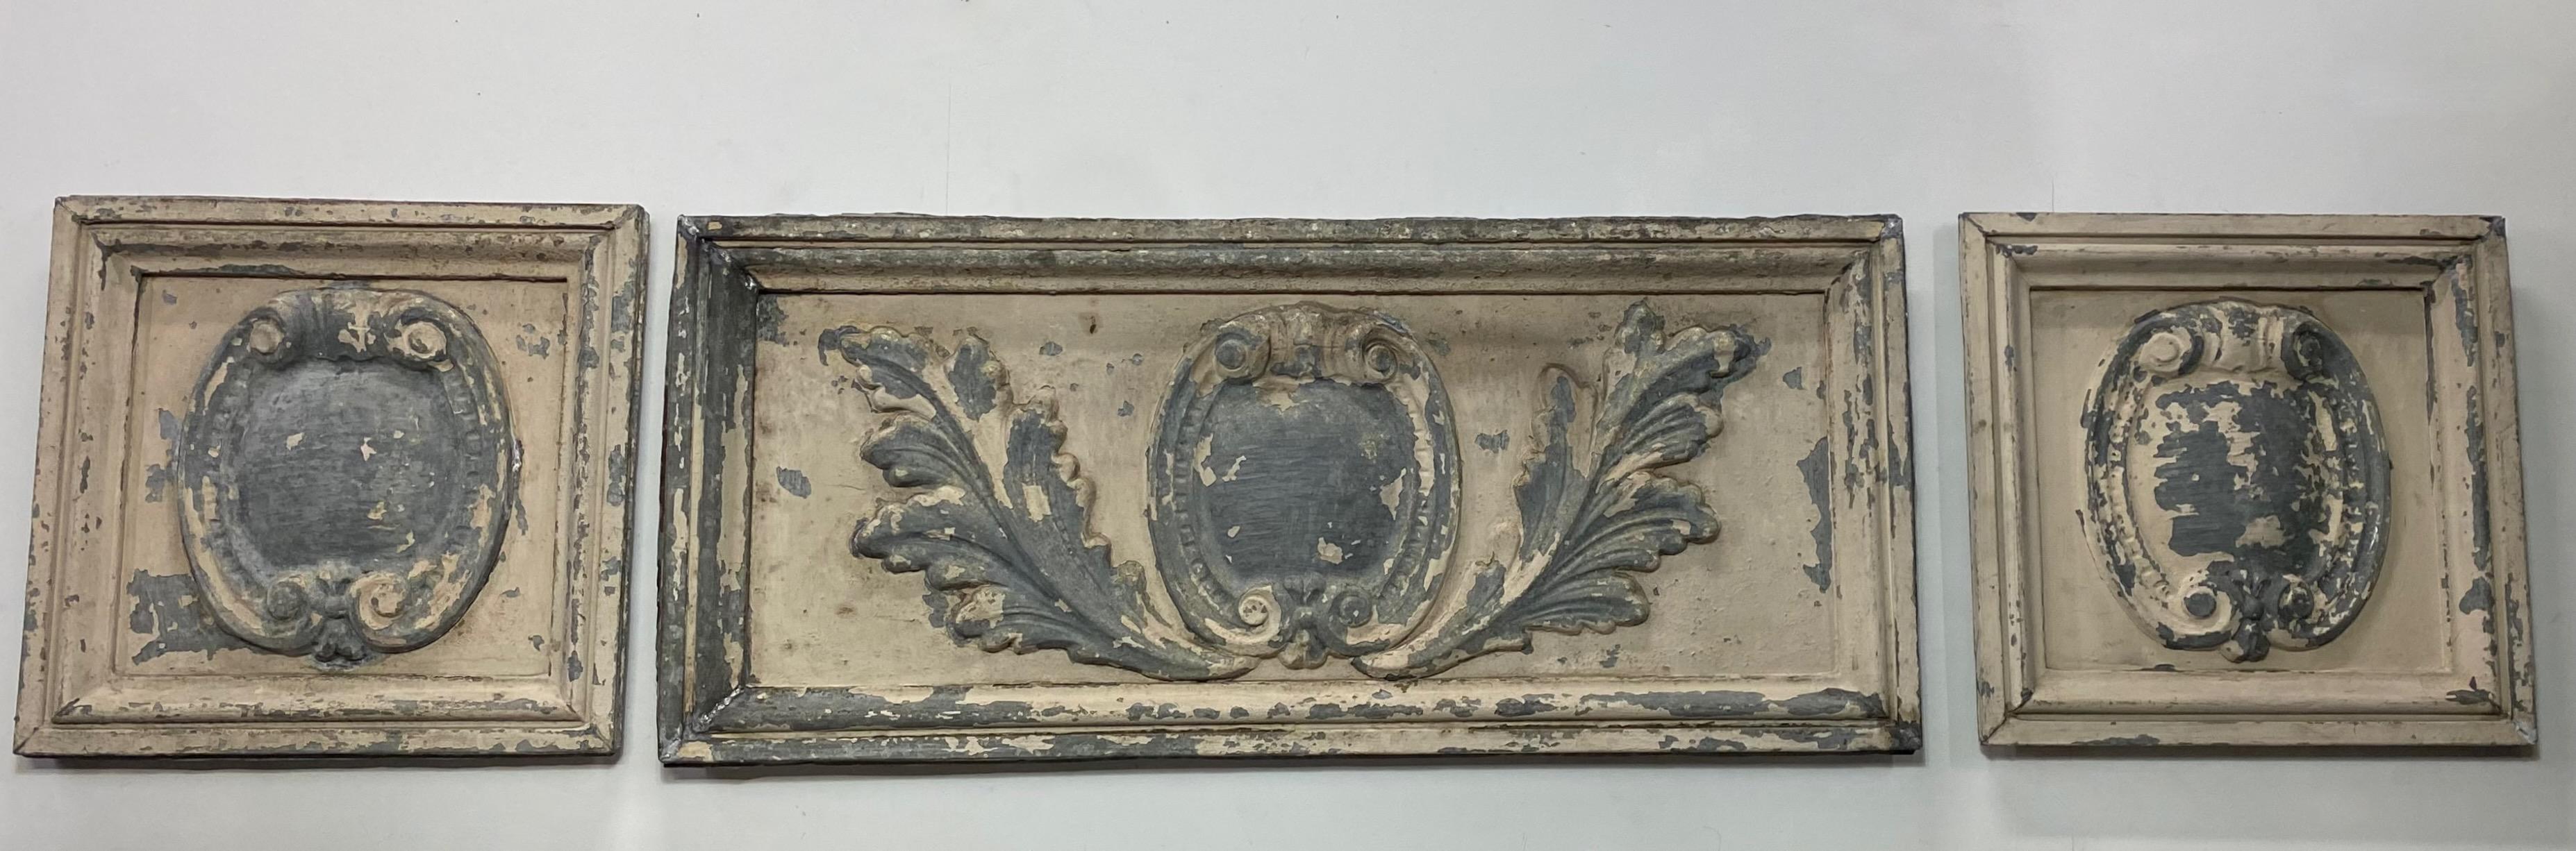 Antique Architectural Element Tin Panels Wall Art, Late 19th Century 2